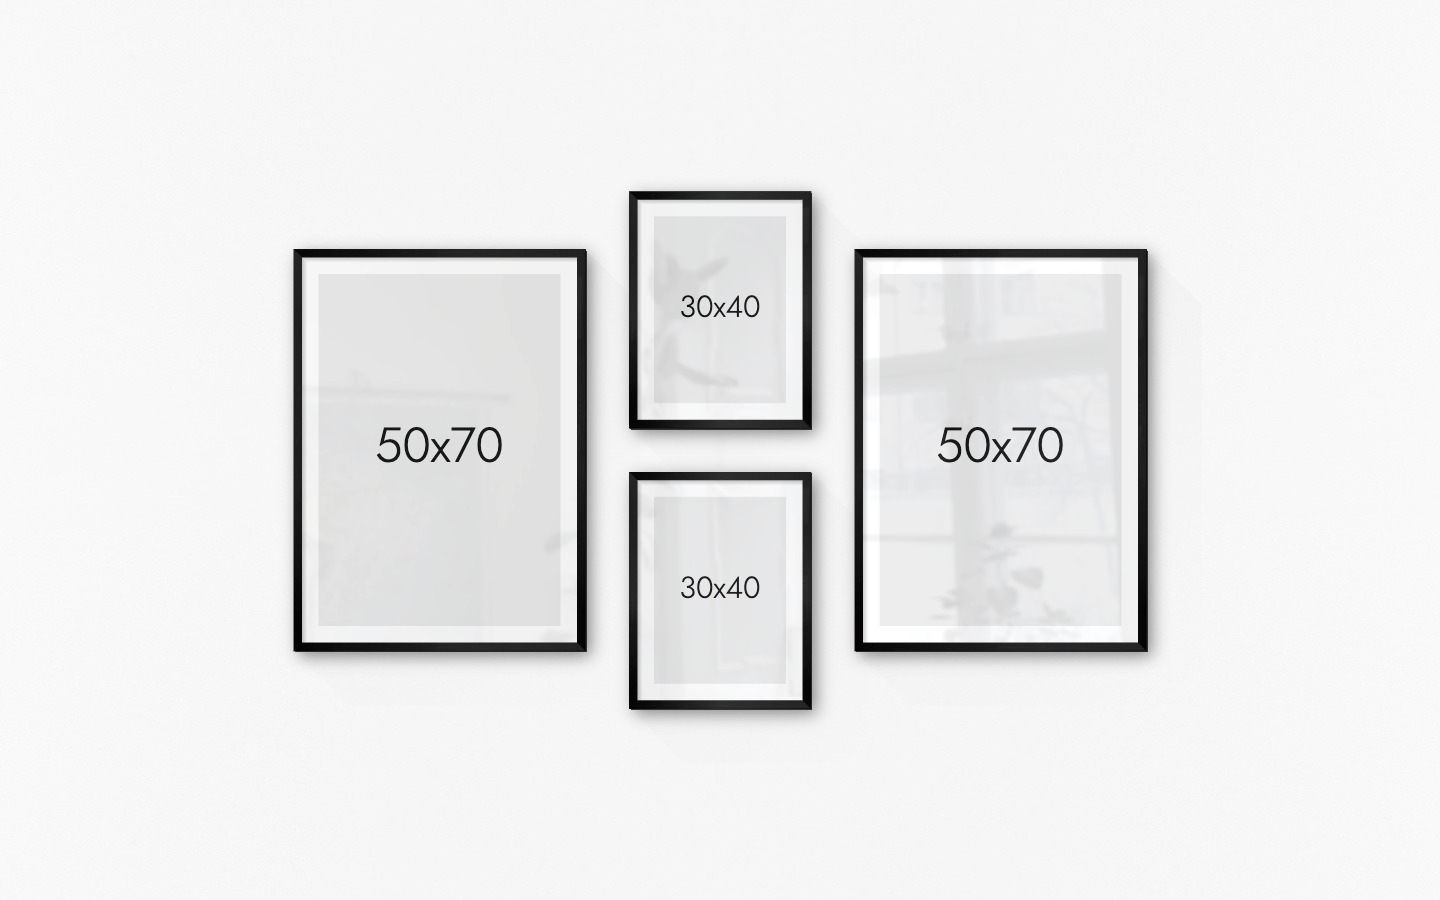 67 free templates for gallery walls